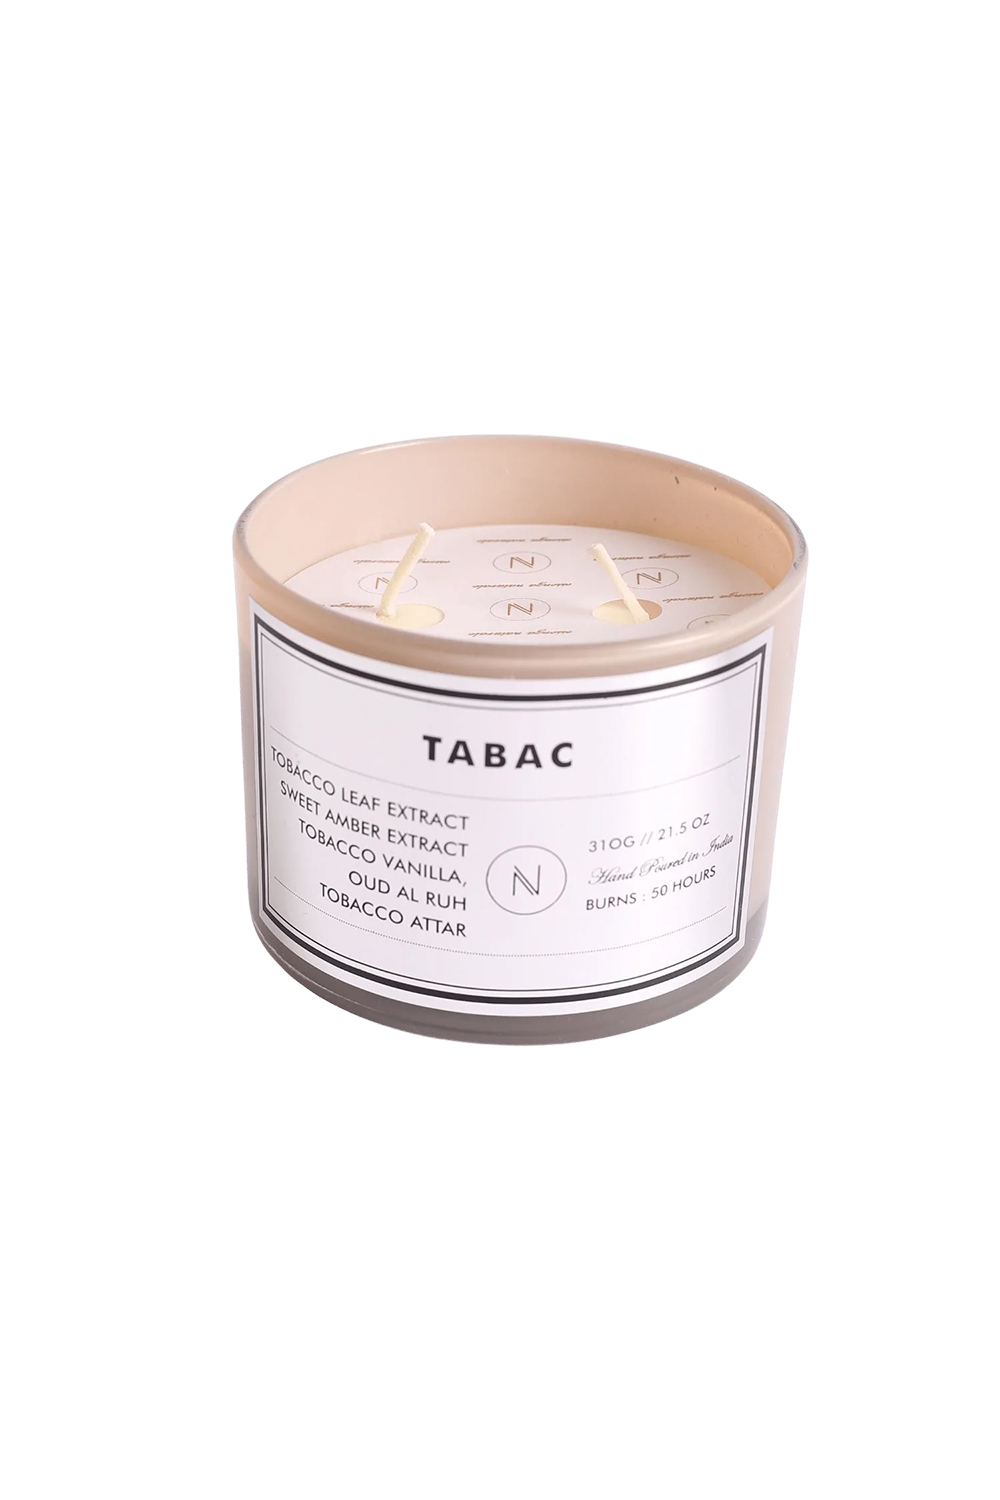 Tabac (candle)-310g